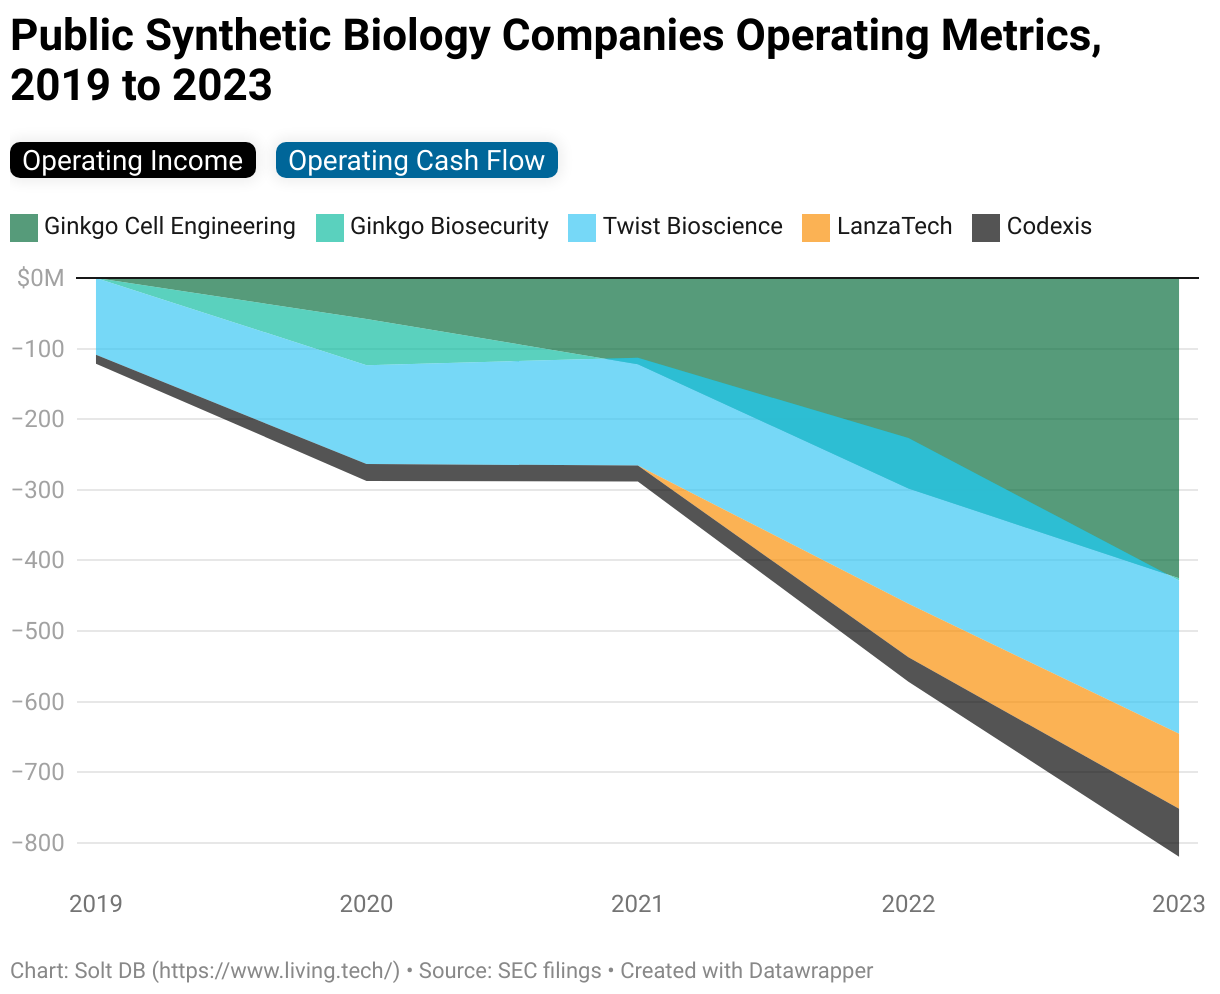 A stacked area chart showing the operating income of publicly-traded synthetic biology companies from 2019 to 2024.